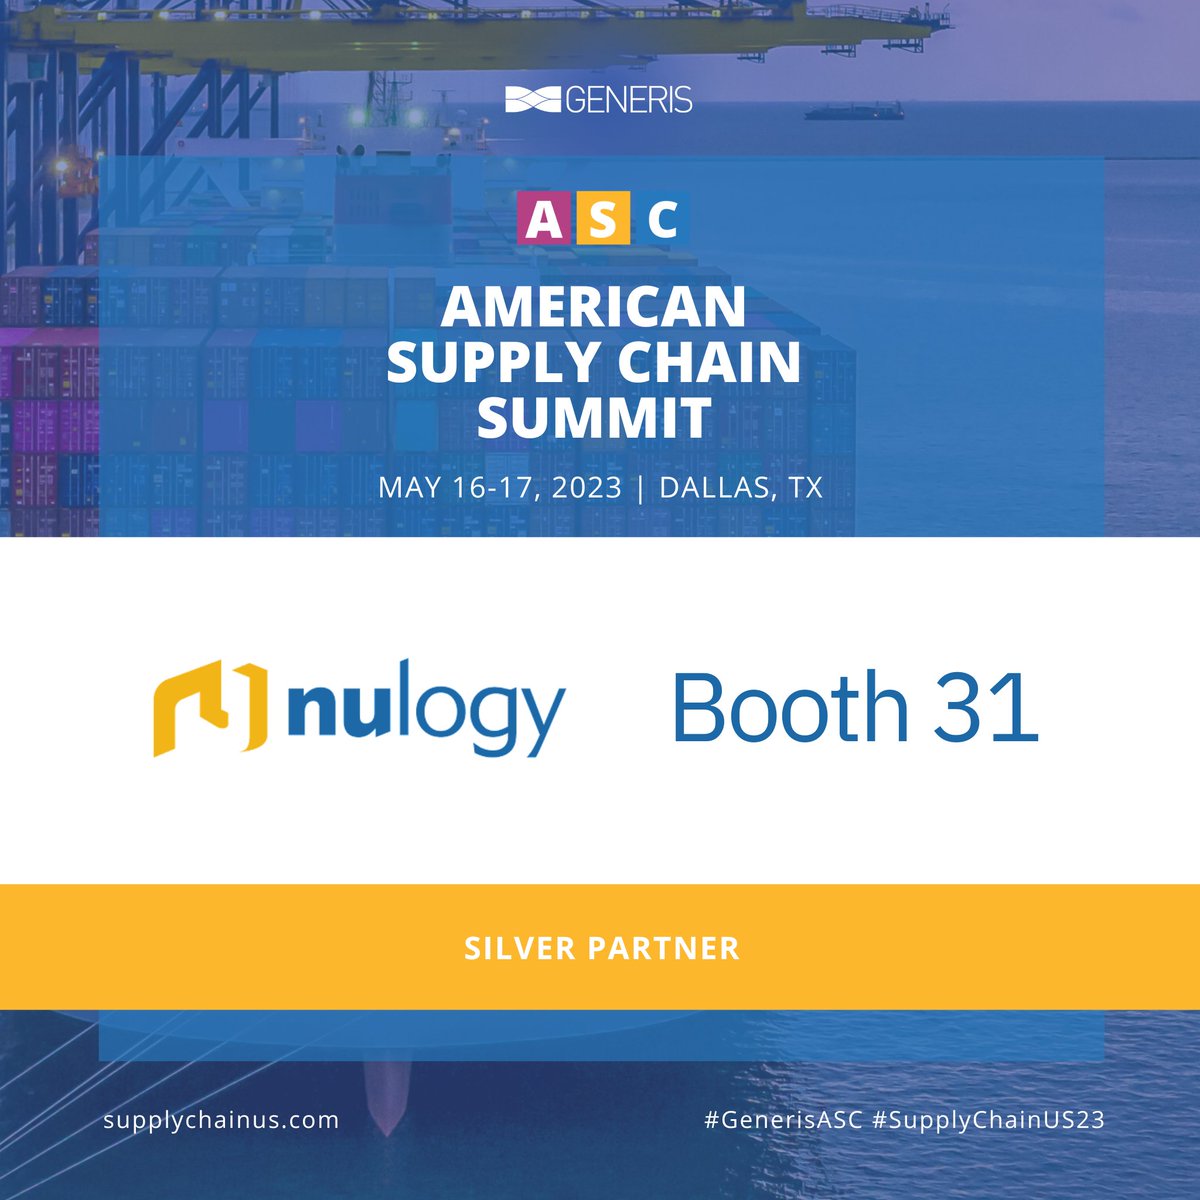 We're in Dallas at Generis American Supply Chain Summit this week! Stop by Booth 31 and say hi to @jdtham and Shiv Arora supplychainus.com #GenerisASC #SupplyChainUS23 @SupplyChainUS